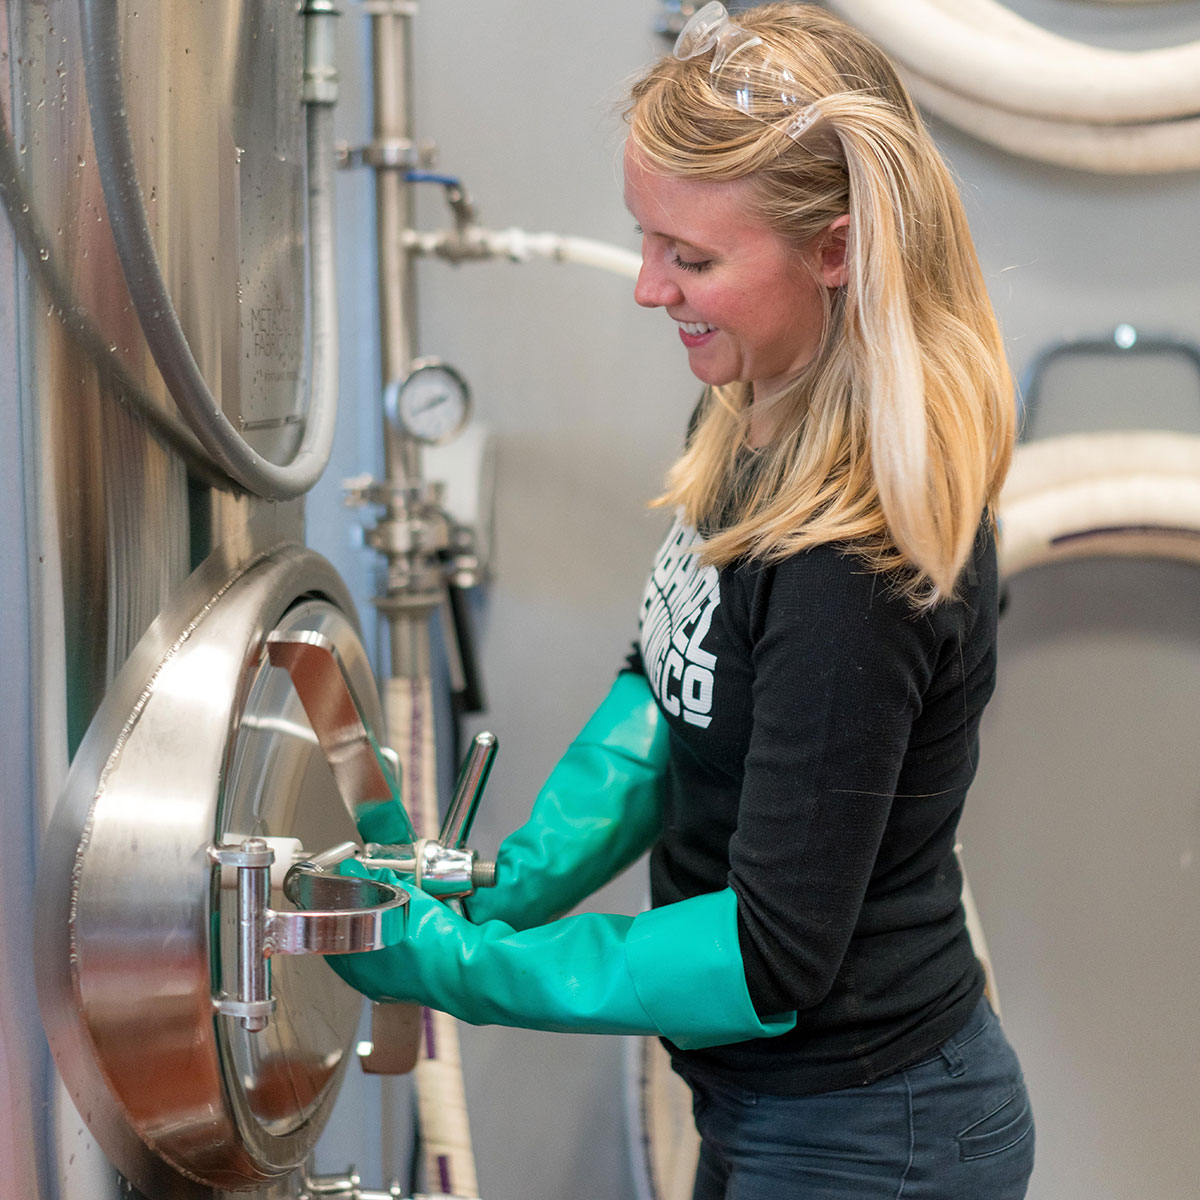 Woman in Black Shirt and Green Latex Gloves working with brewing equipment